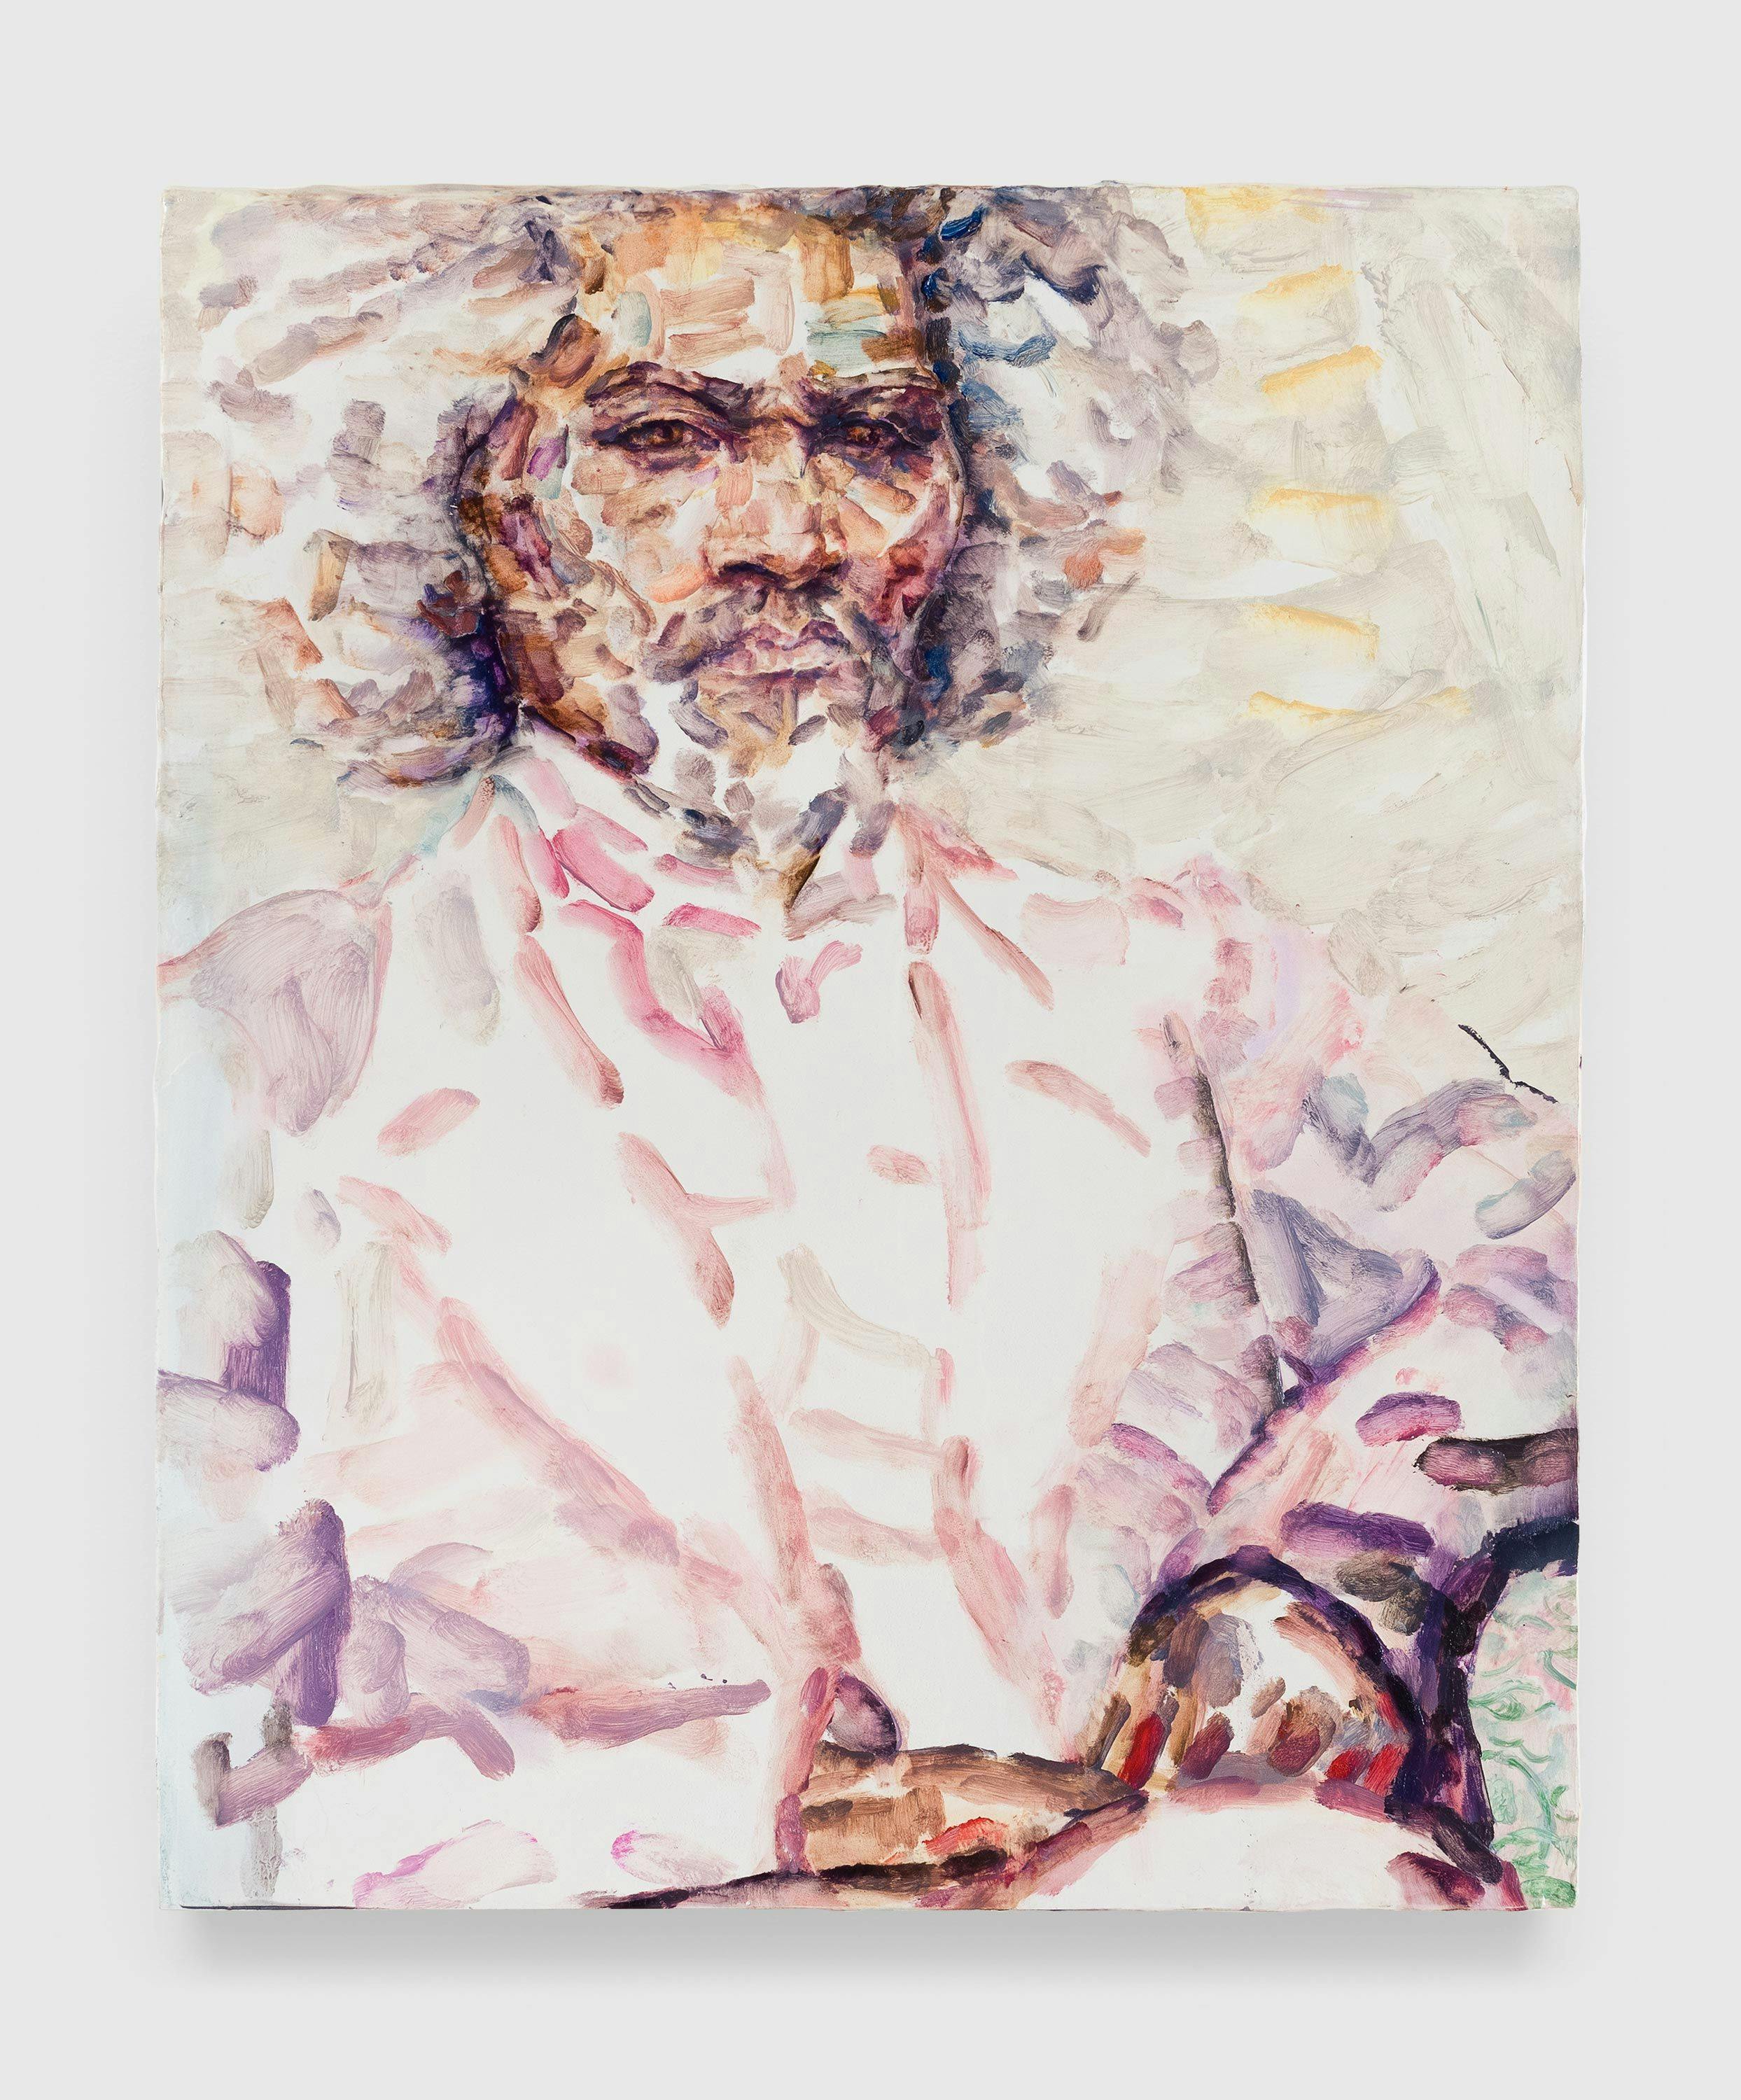 A painting by Elizabeth Peyton, titled Frederick Douglass,1863, dated 2021.